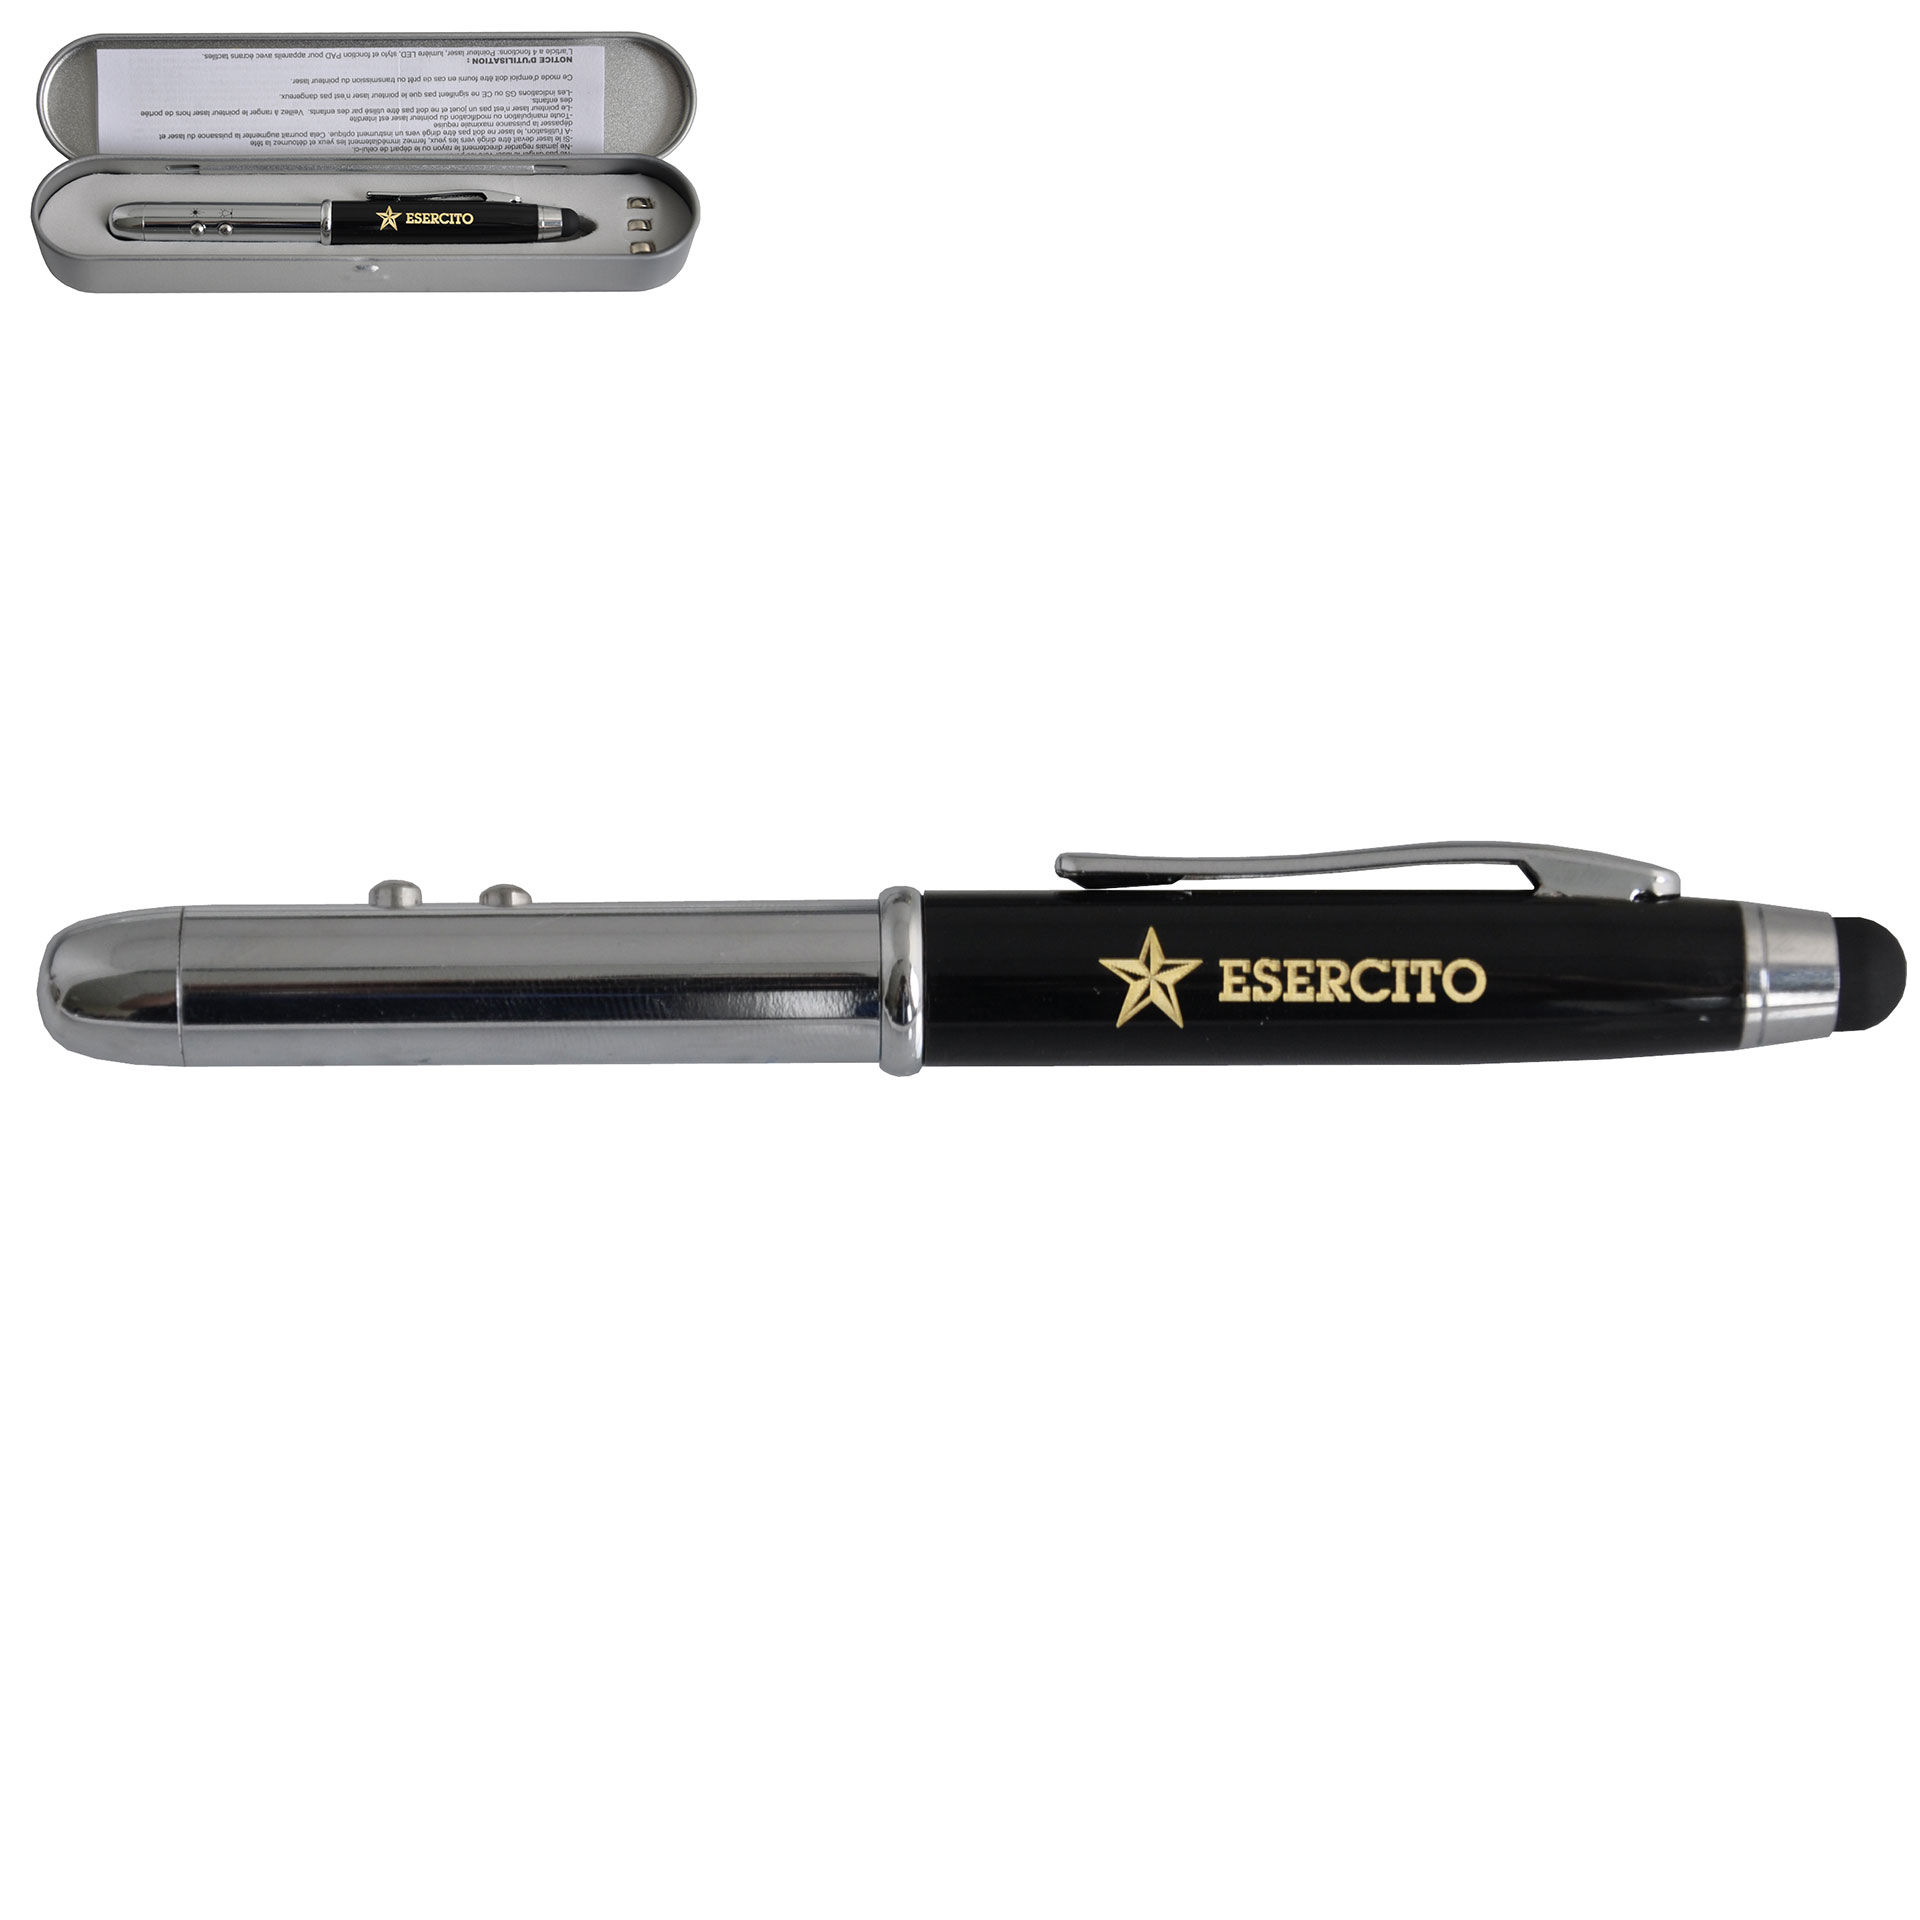 PENNA LASERPOINTER TOUCH TALENT IN BOX METALLICO ESERCITO